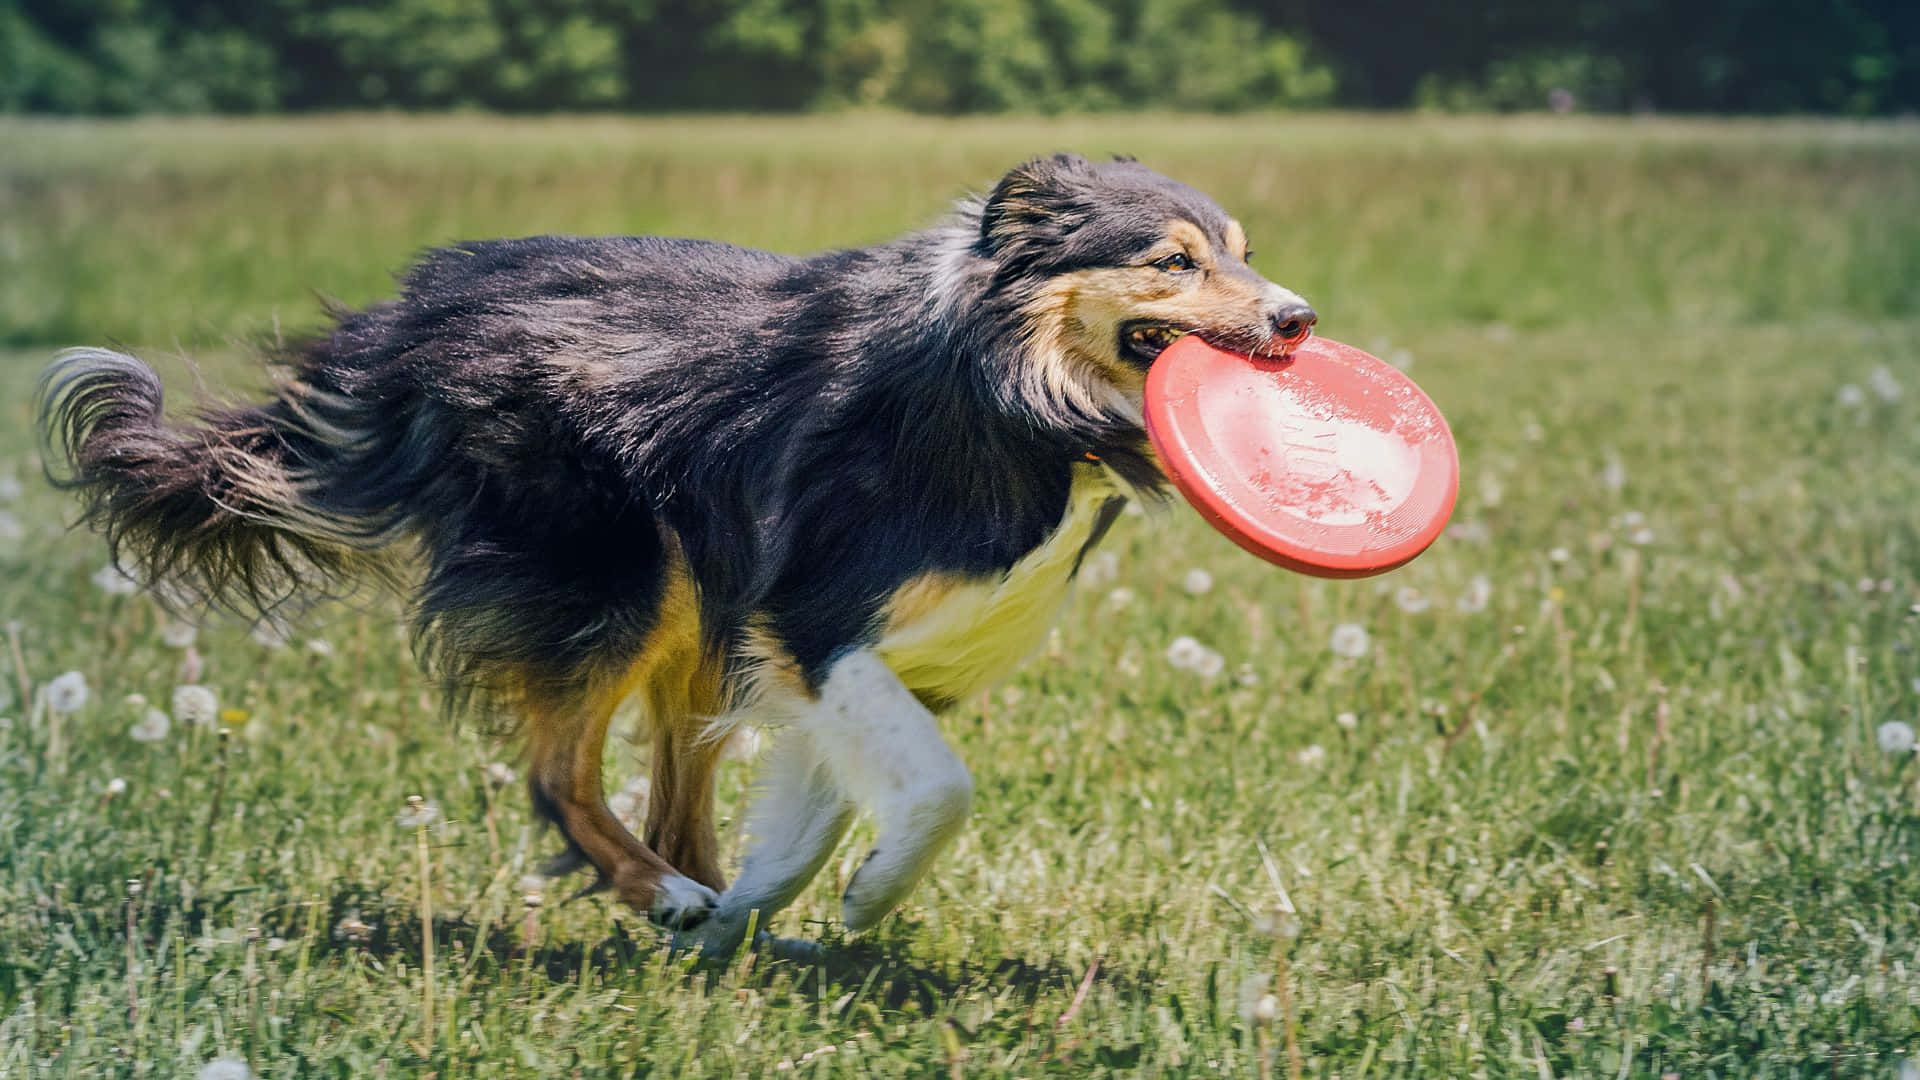 A Dog Is Running With A Frisbee In Its Mouth